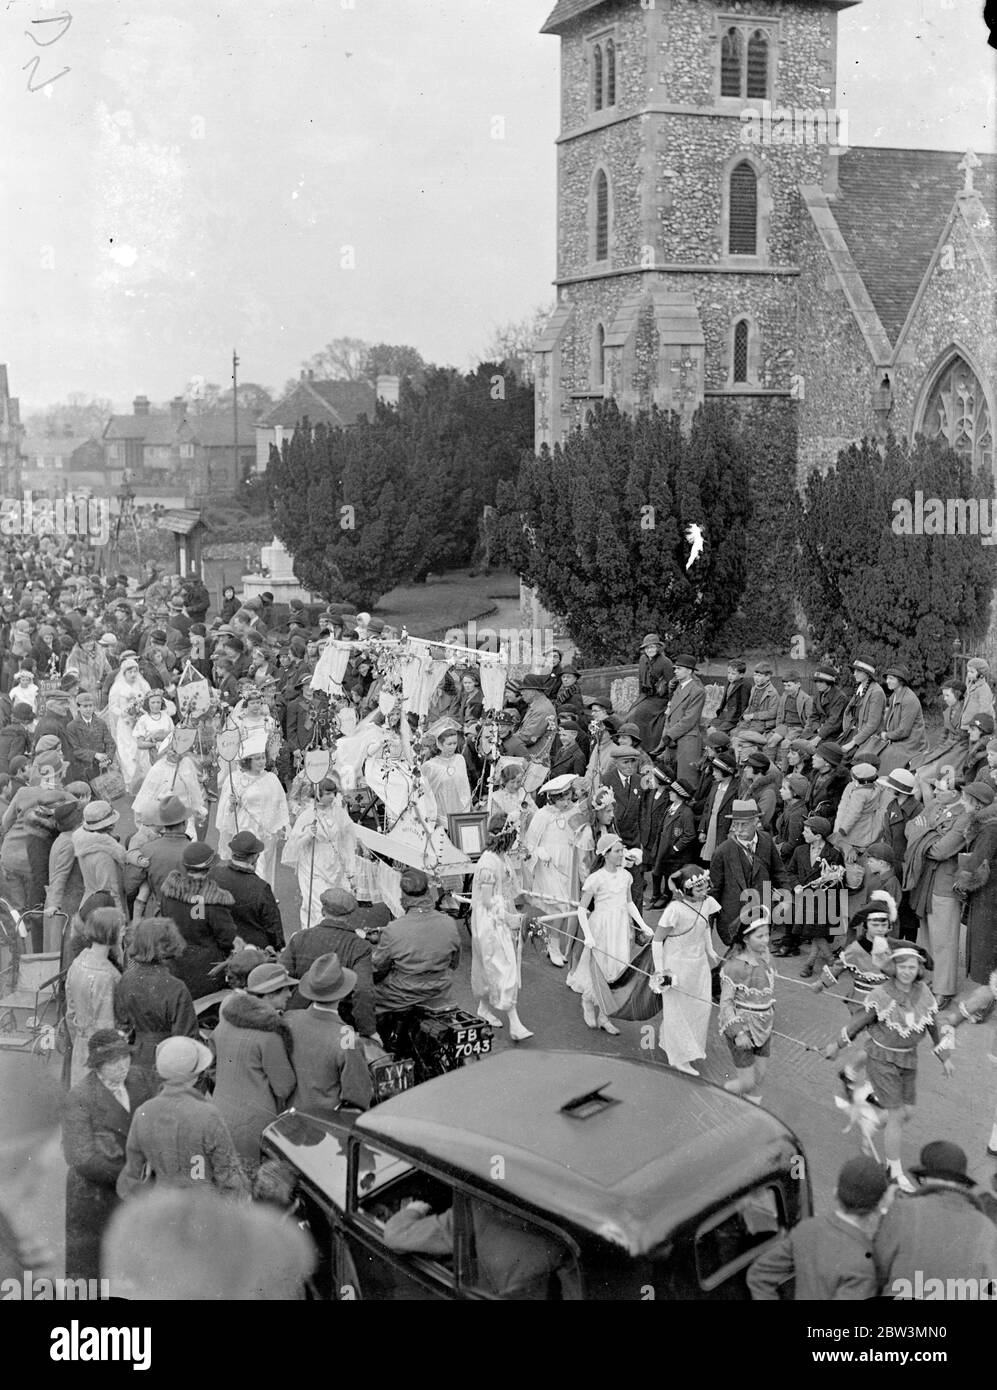 May Queen of London crowned at Hayes . Miss Olive Bone of Balham was crowned May Queen of London at Hayes , Kent . The Queen passed in procession throuh the High Street . Photo shows , the May Queen ' s procession through the High Street at Hayes . 2 May 1936 Stock Photo